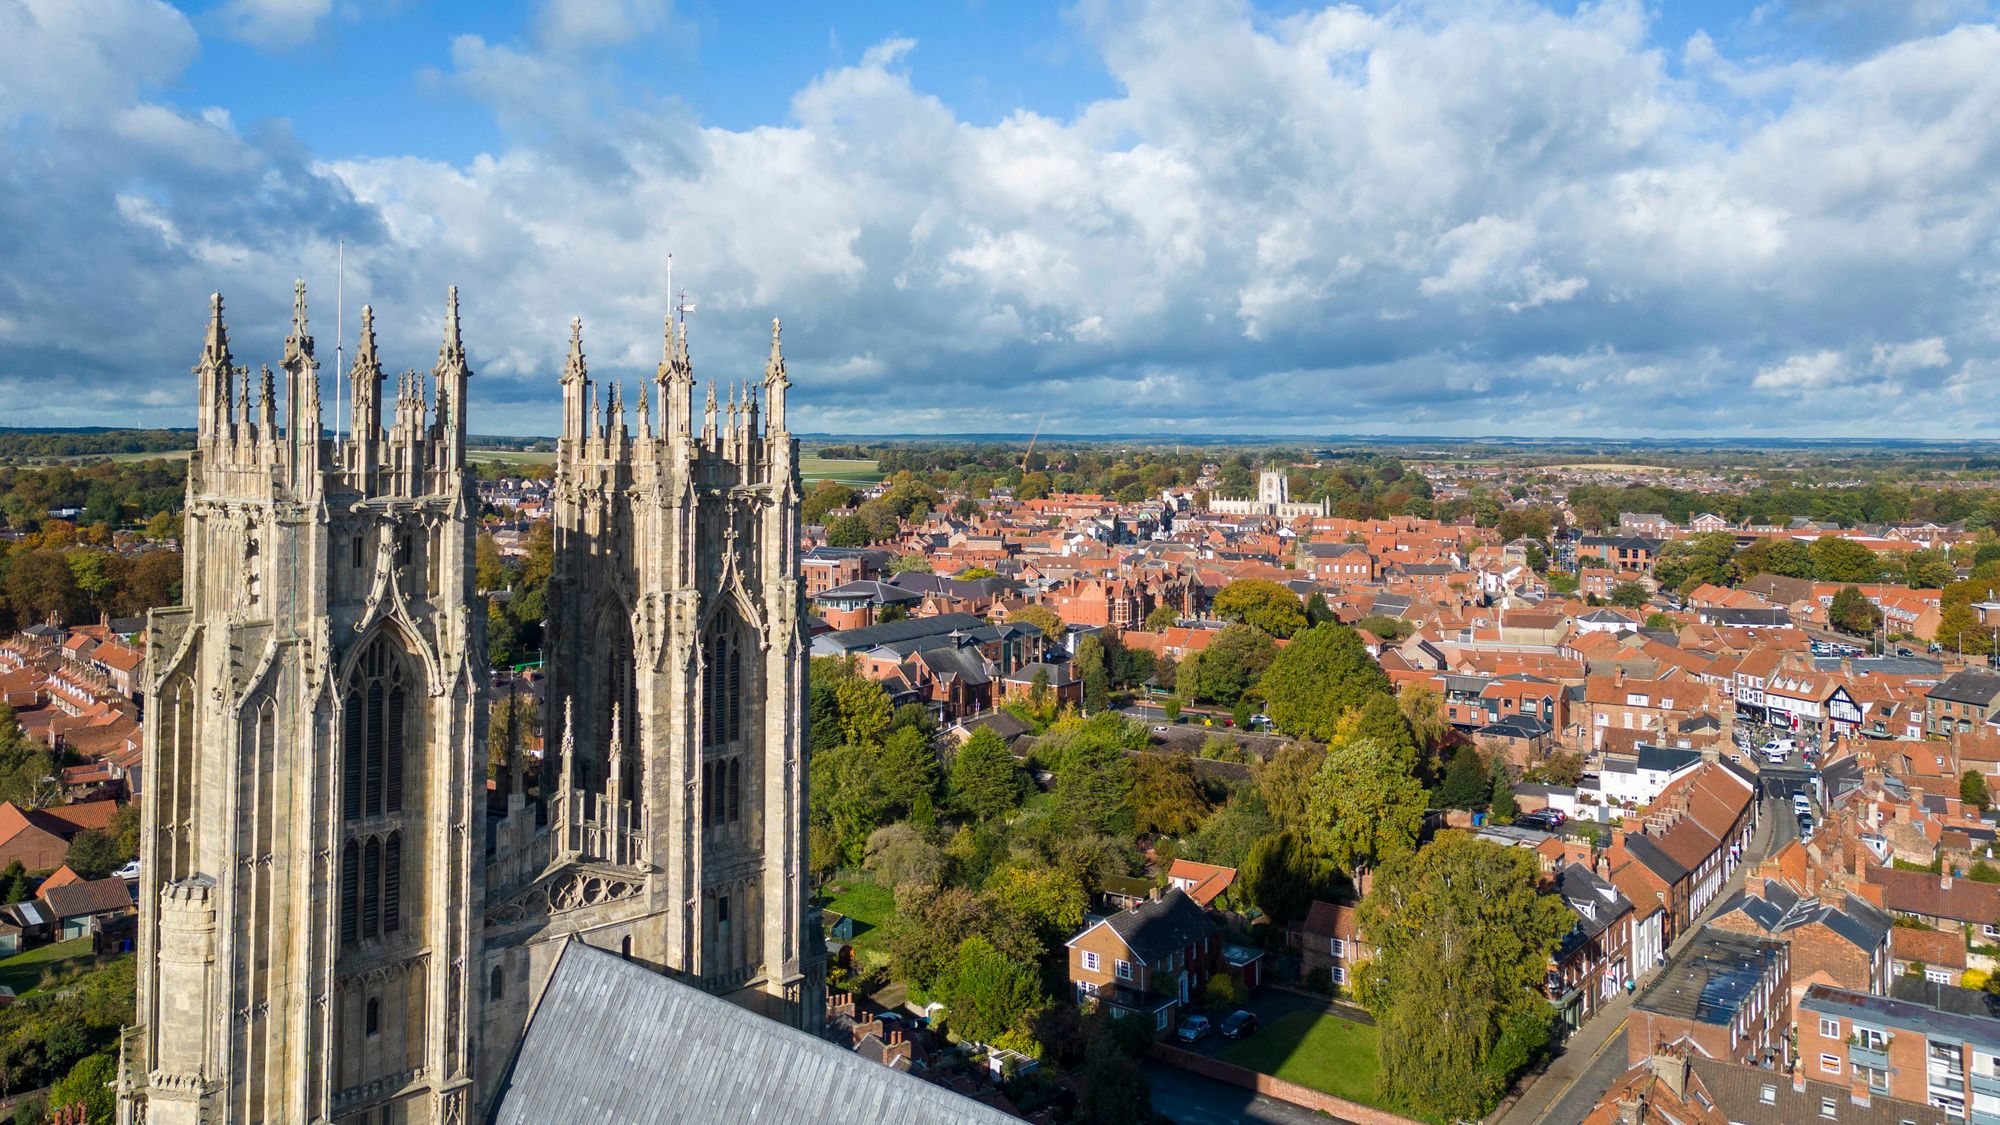 Be there: Beverley Minster and Beverley town in glorious VR.